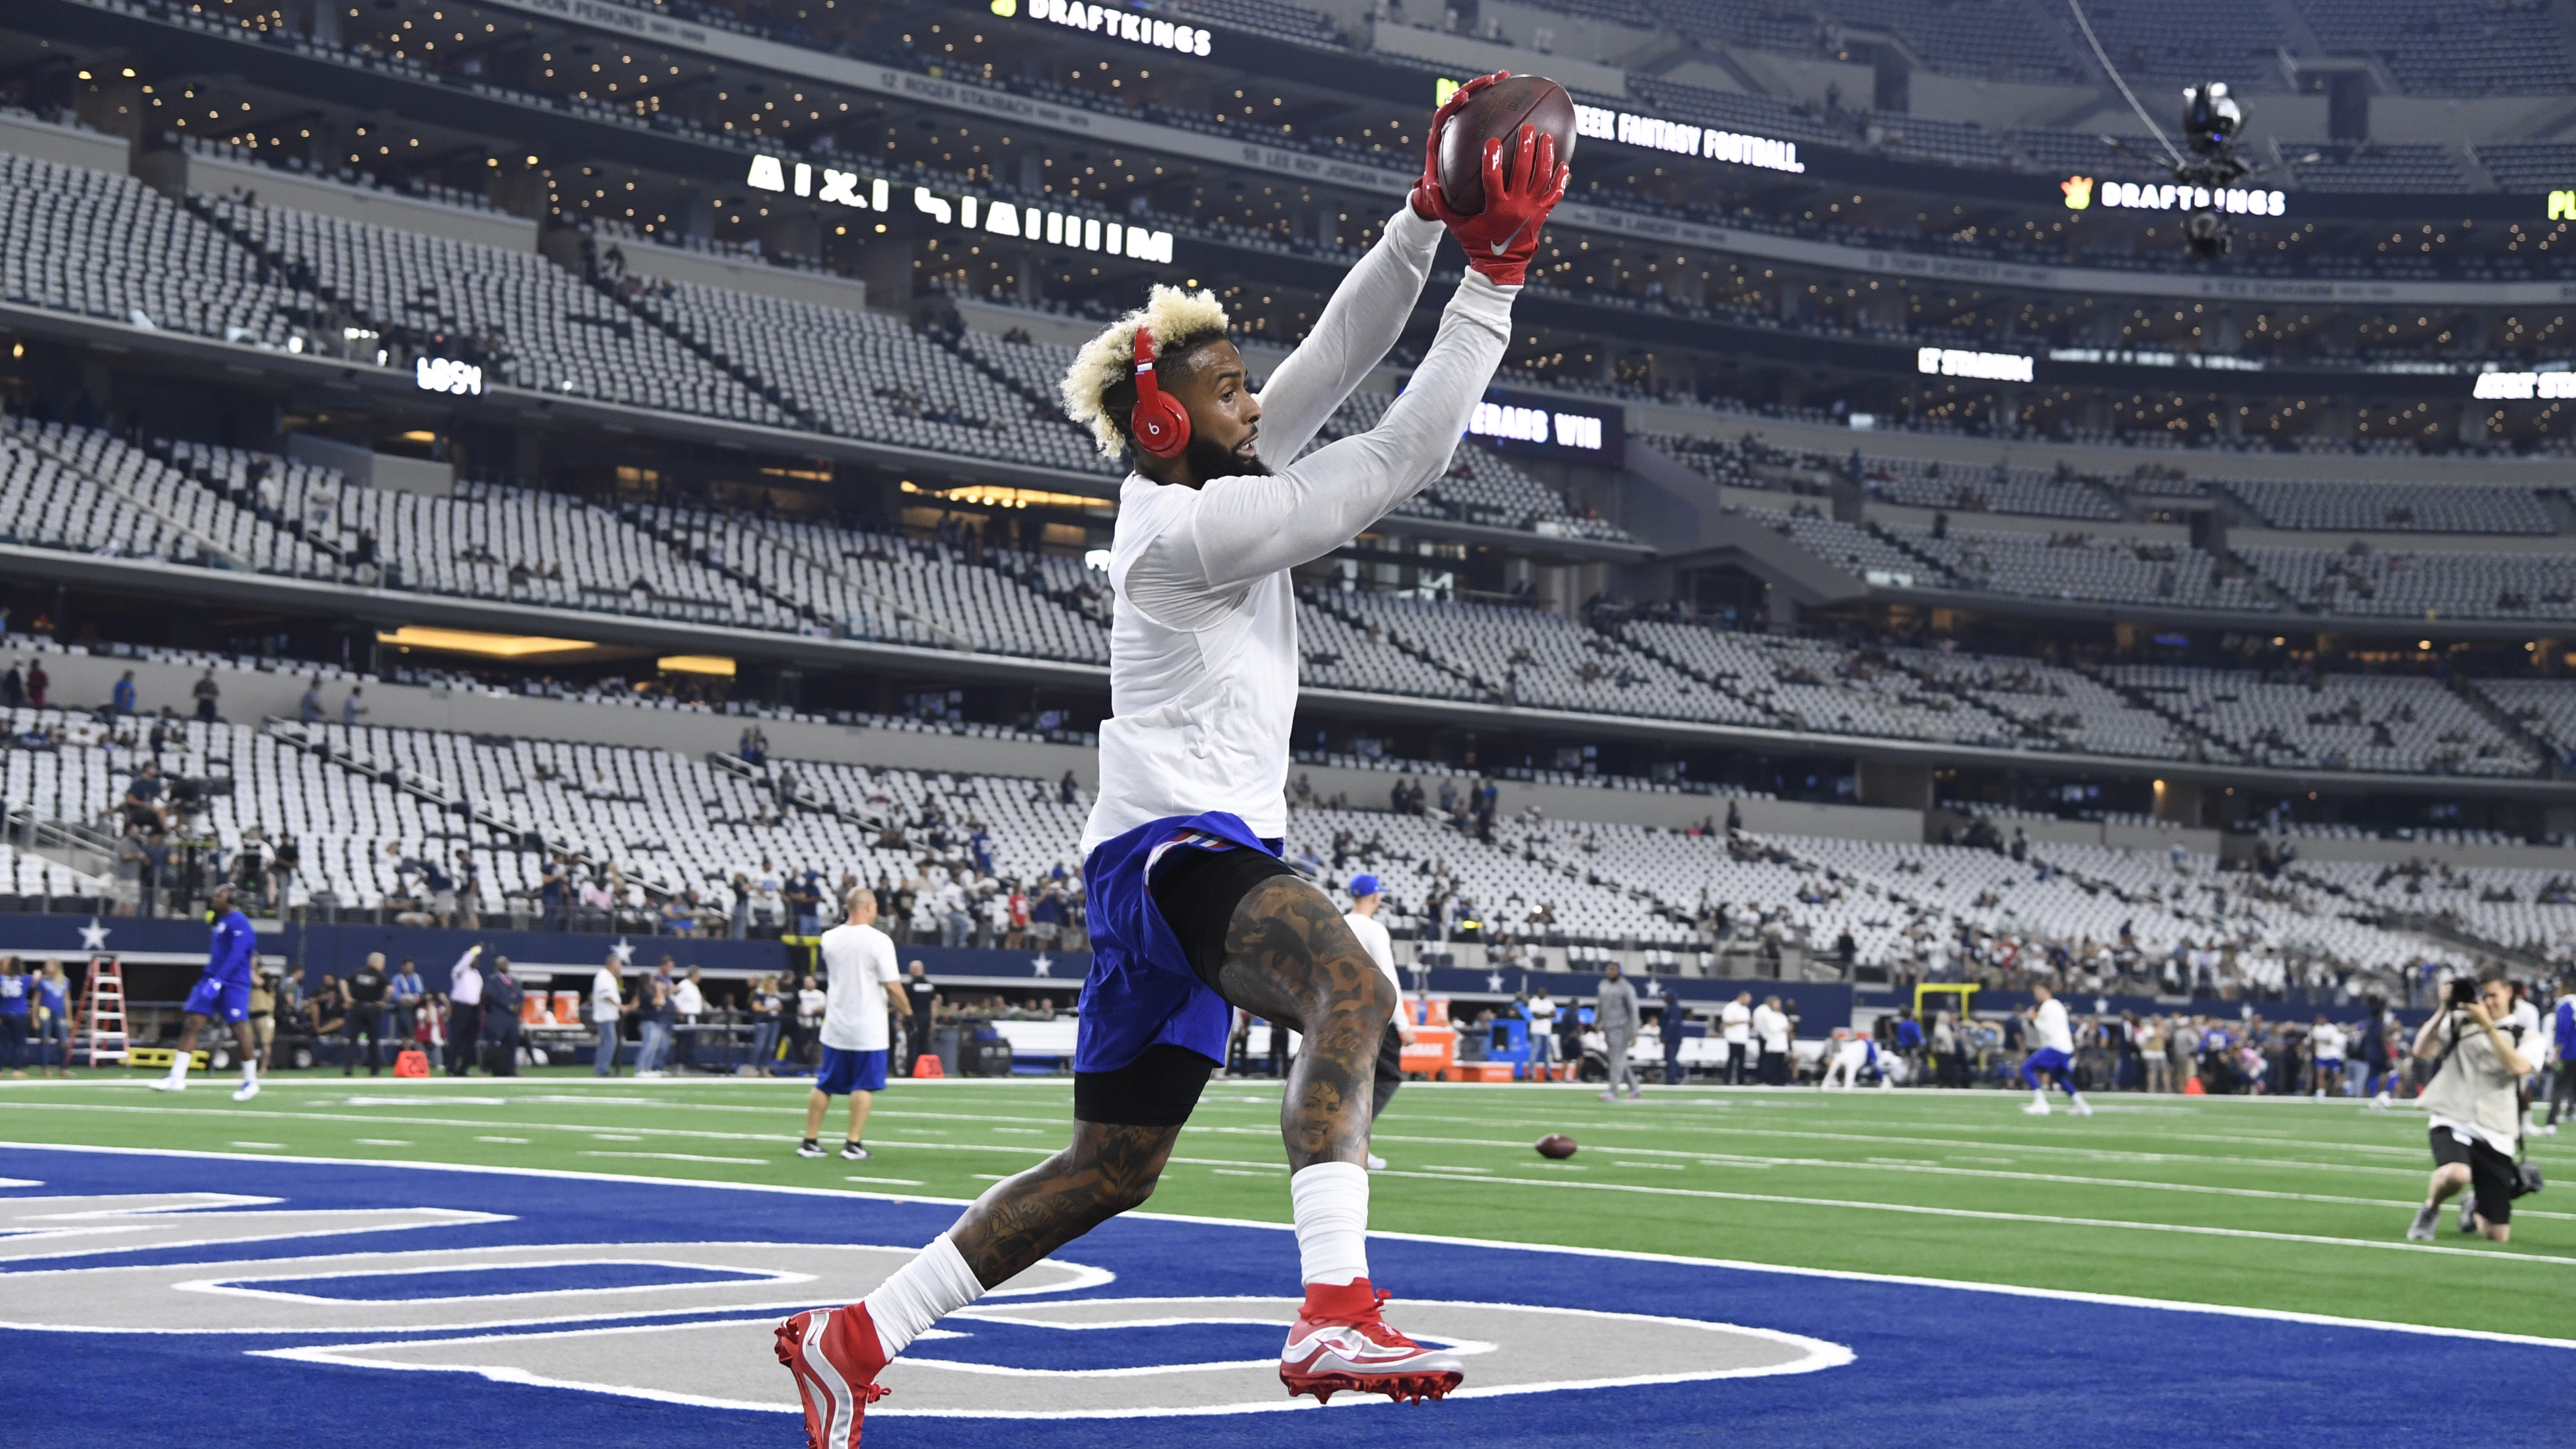 Odell warming up against the Dallas Cowboys